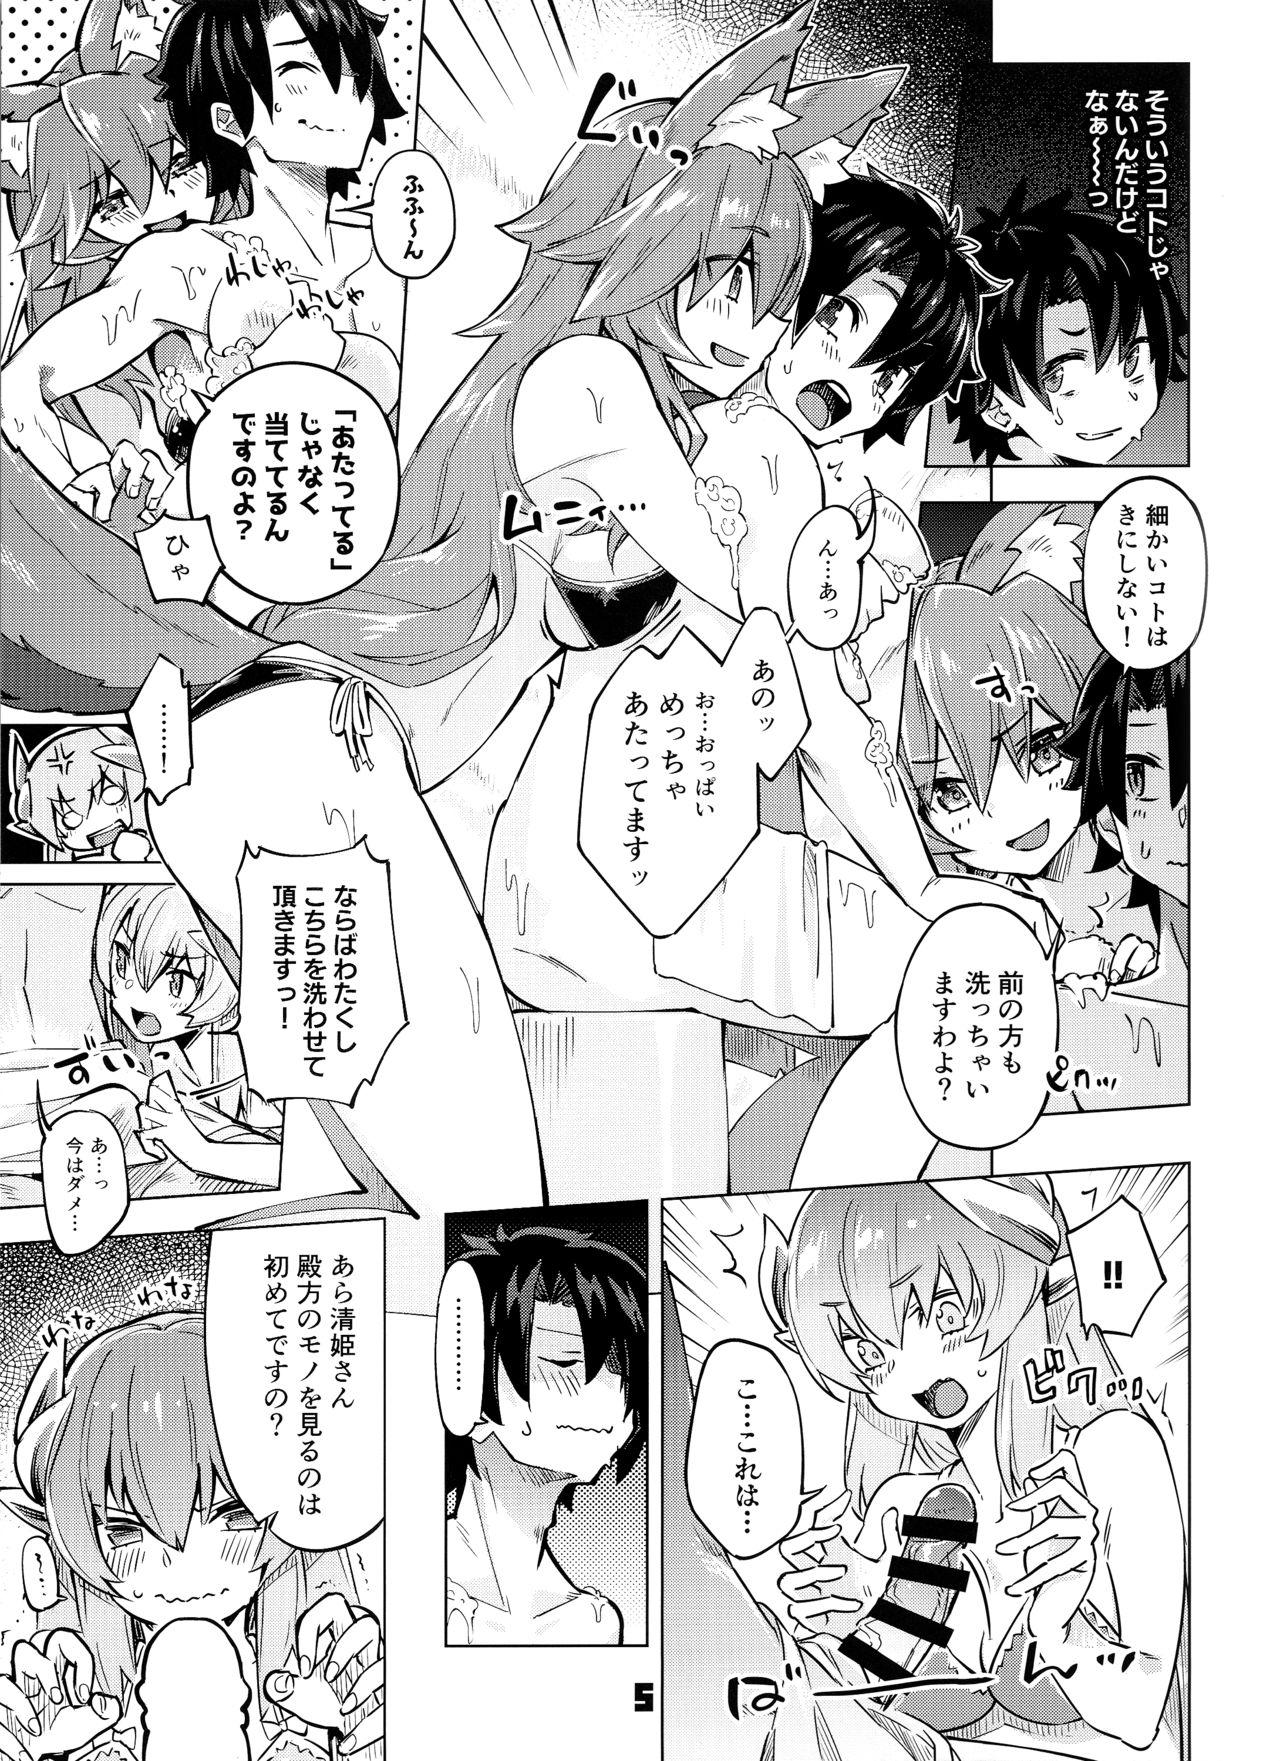 Pantyhose Sex Shinai to Derarenai My Room 2 - My room can not go out - Fate grand order Gaping - Page 4